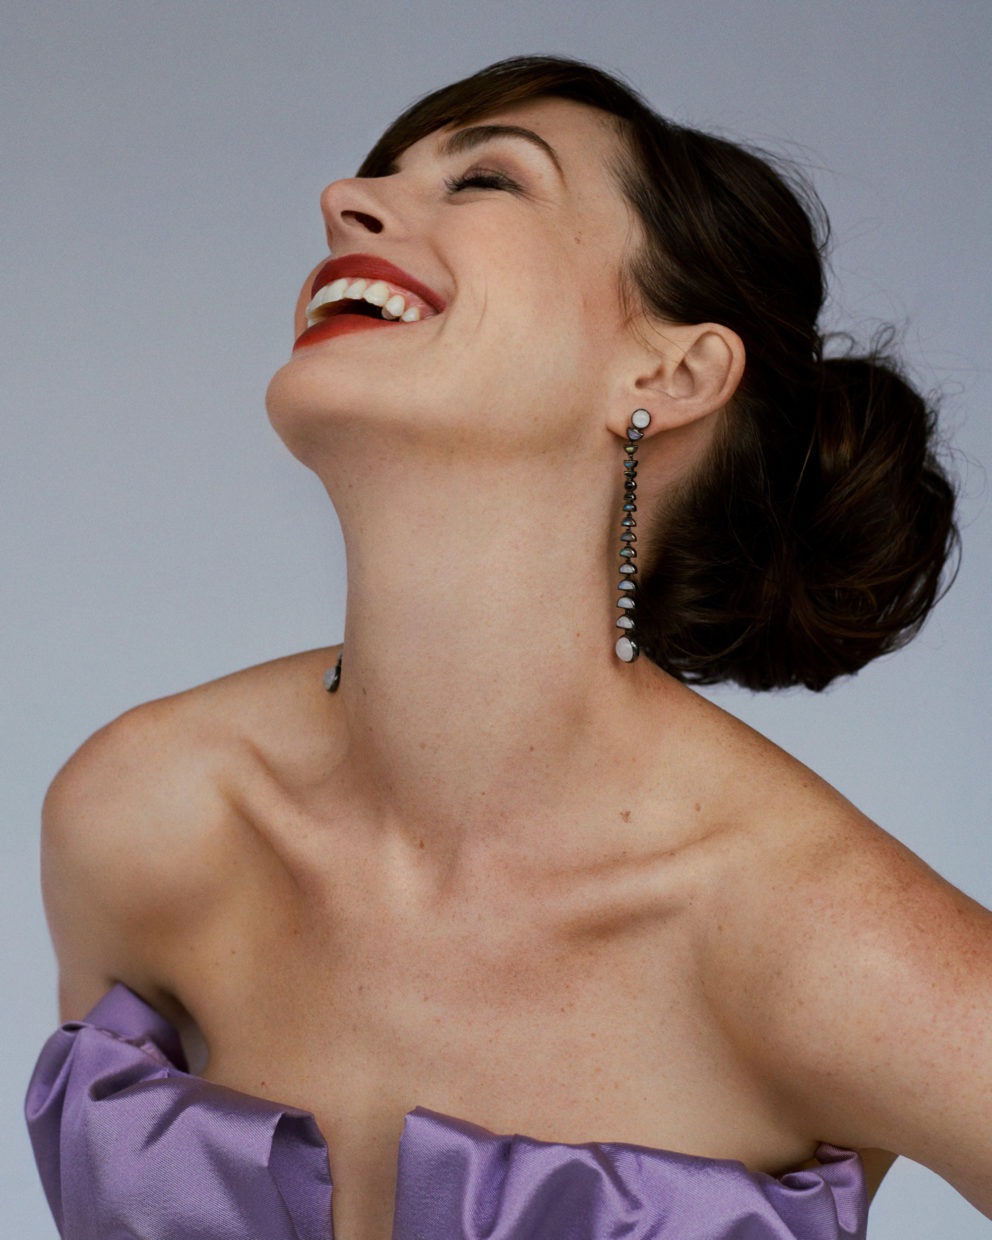 210112 0040 Anne Hathaway 285 Web By Christian Hogstedt